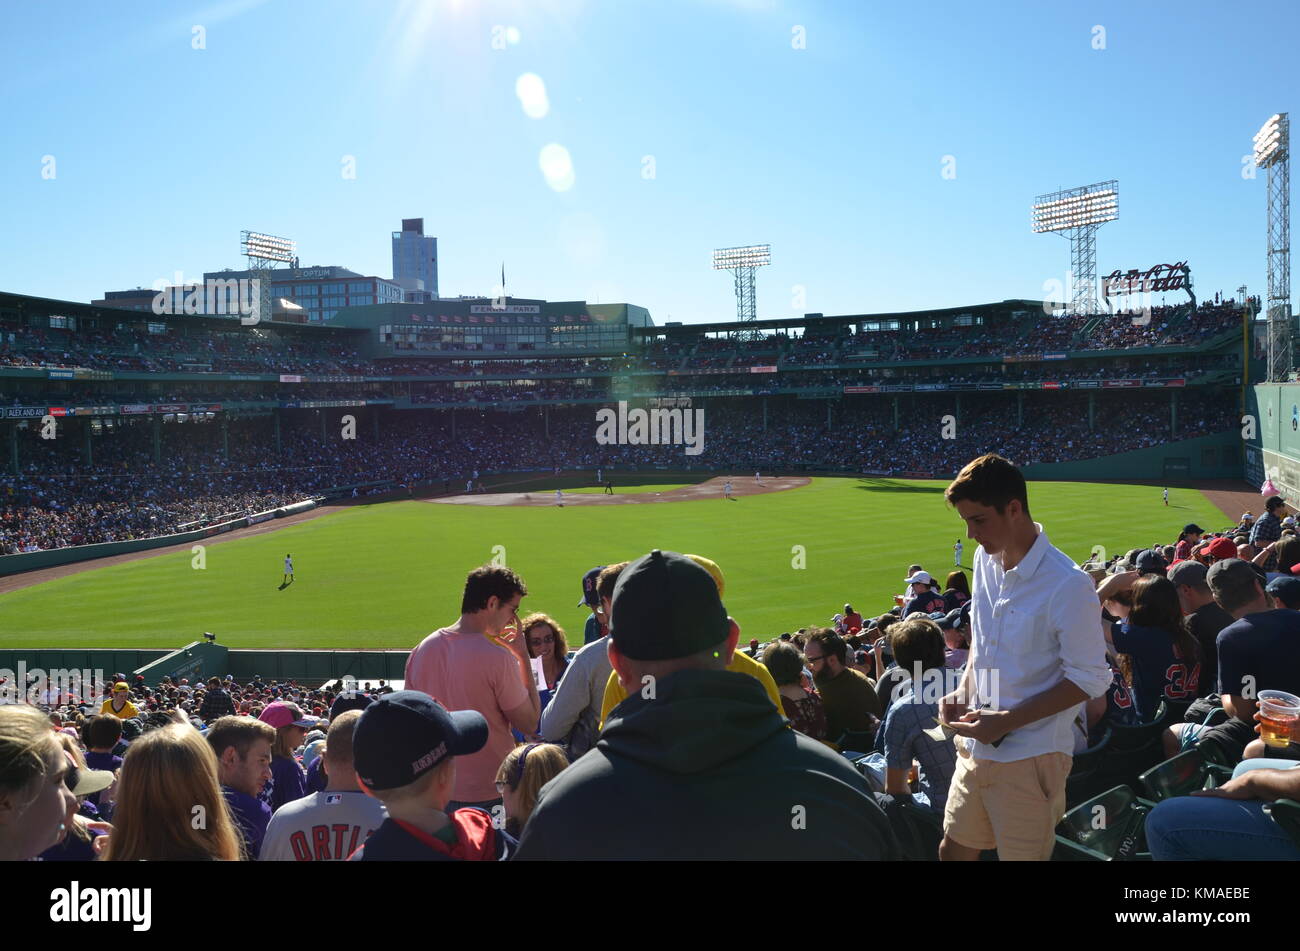 Crowd at Fenway Park, home of the Boston Red Sox, Yawkey Way, Boston, Mass. Stock Photo